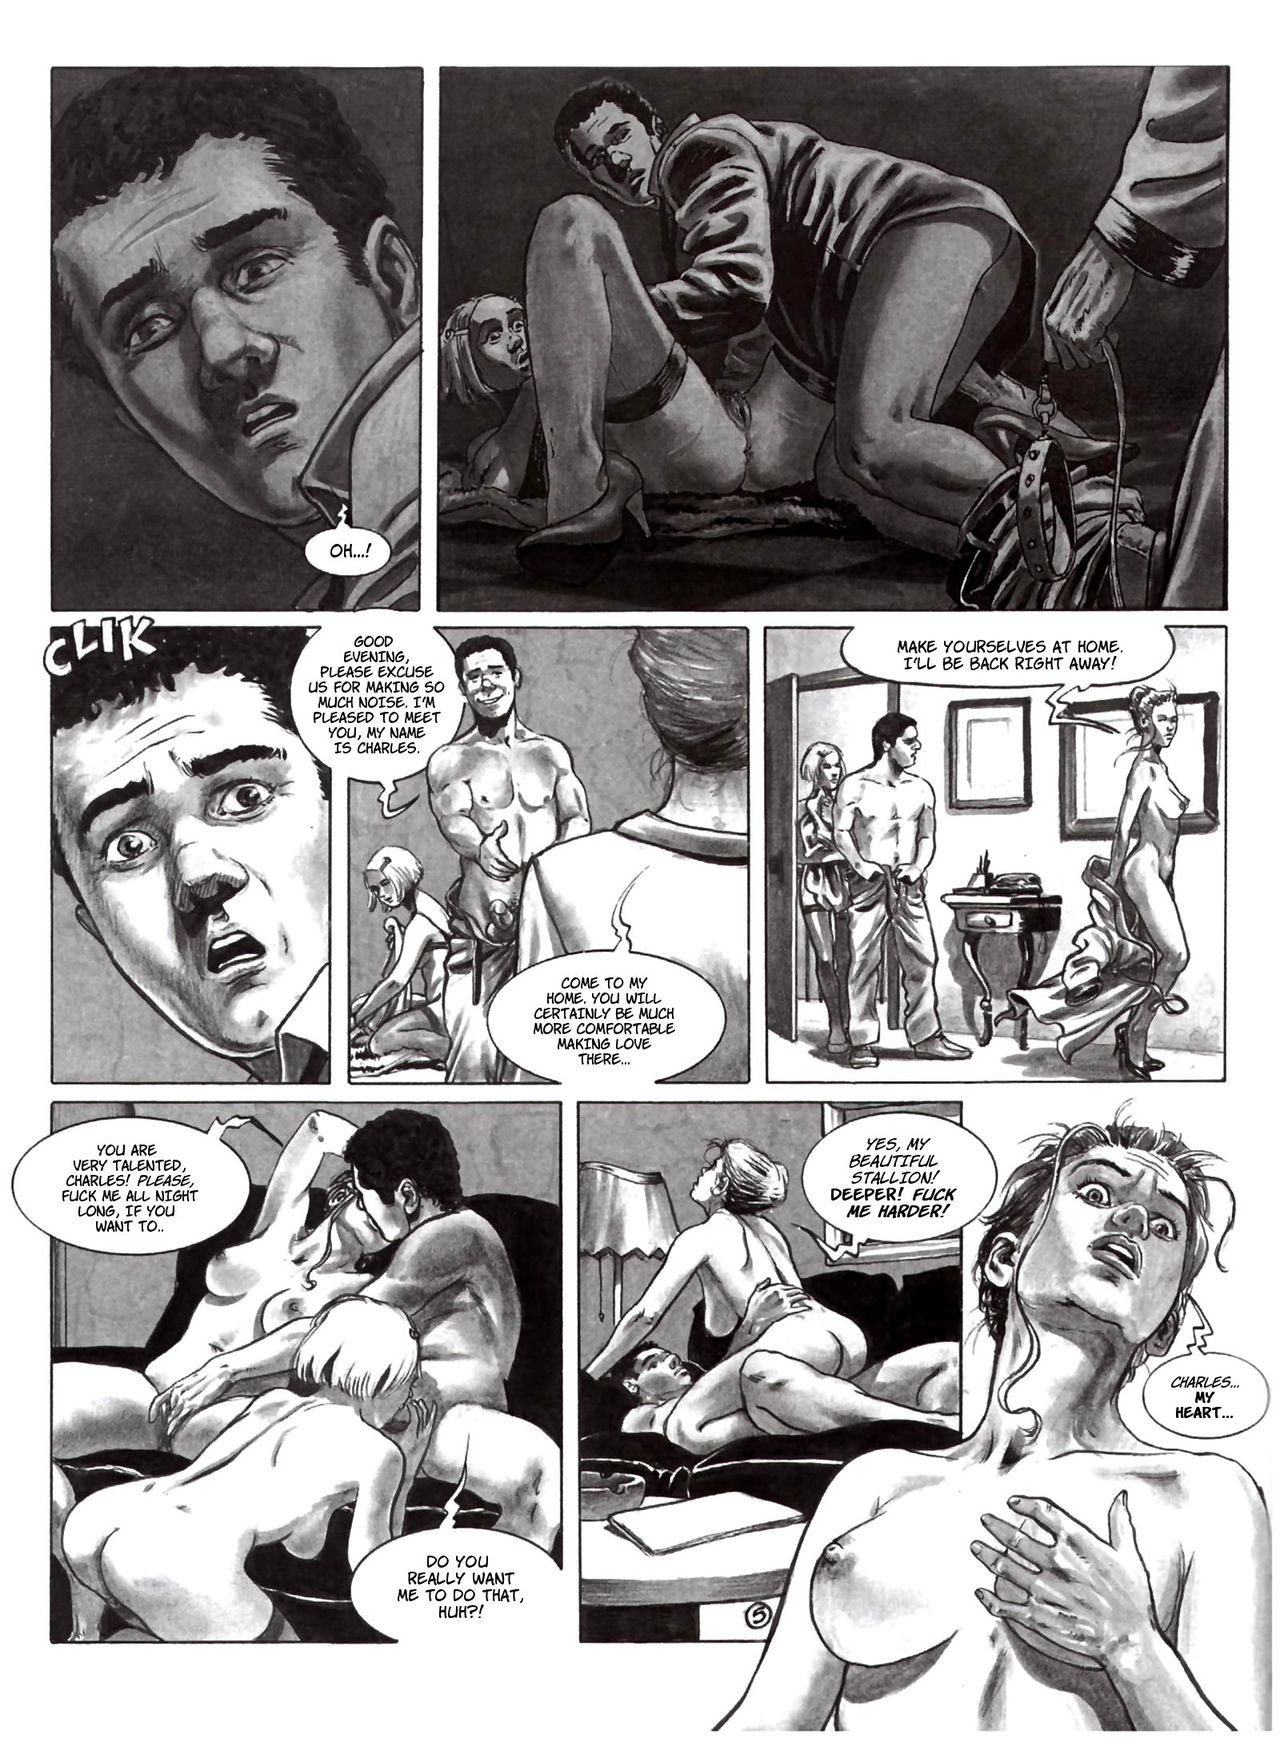 Abuse Included by Luca Tarlazzi page 7